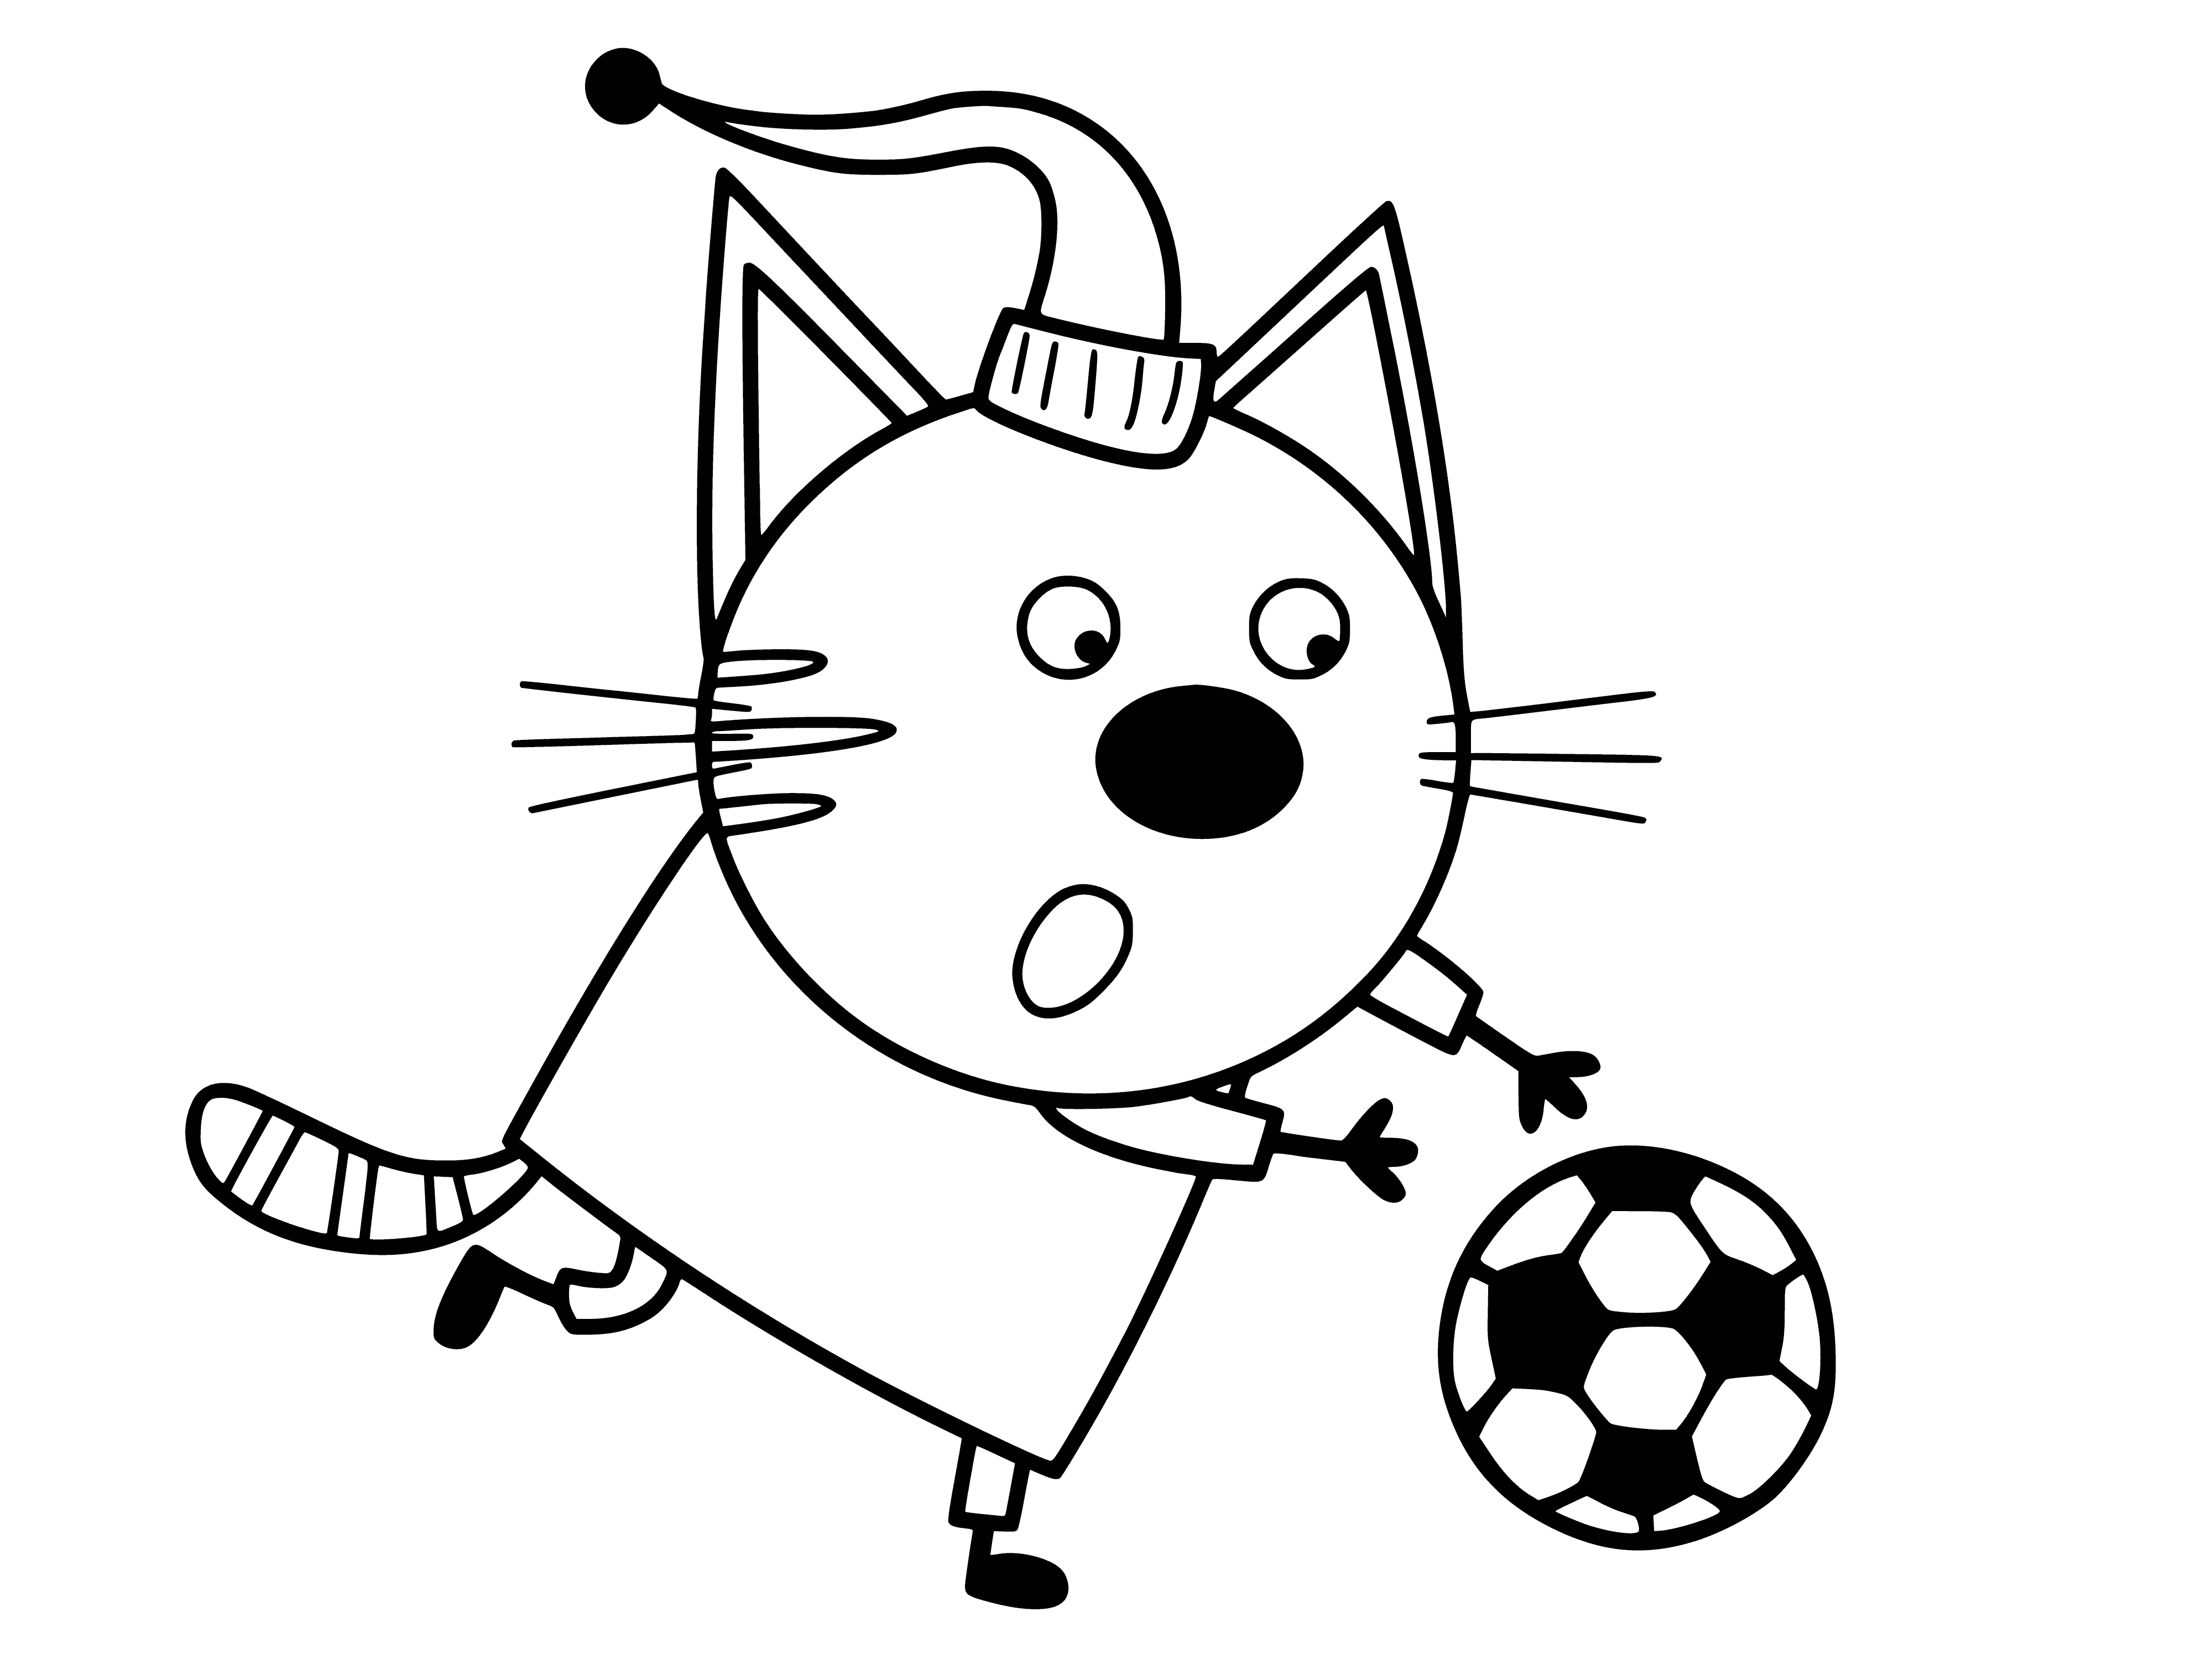 coloring page: 3 cats in coloring page: 1 chasing a ball, 2 watching, 3 sitting.